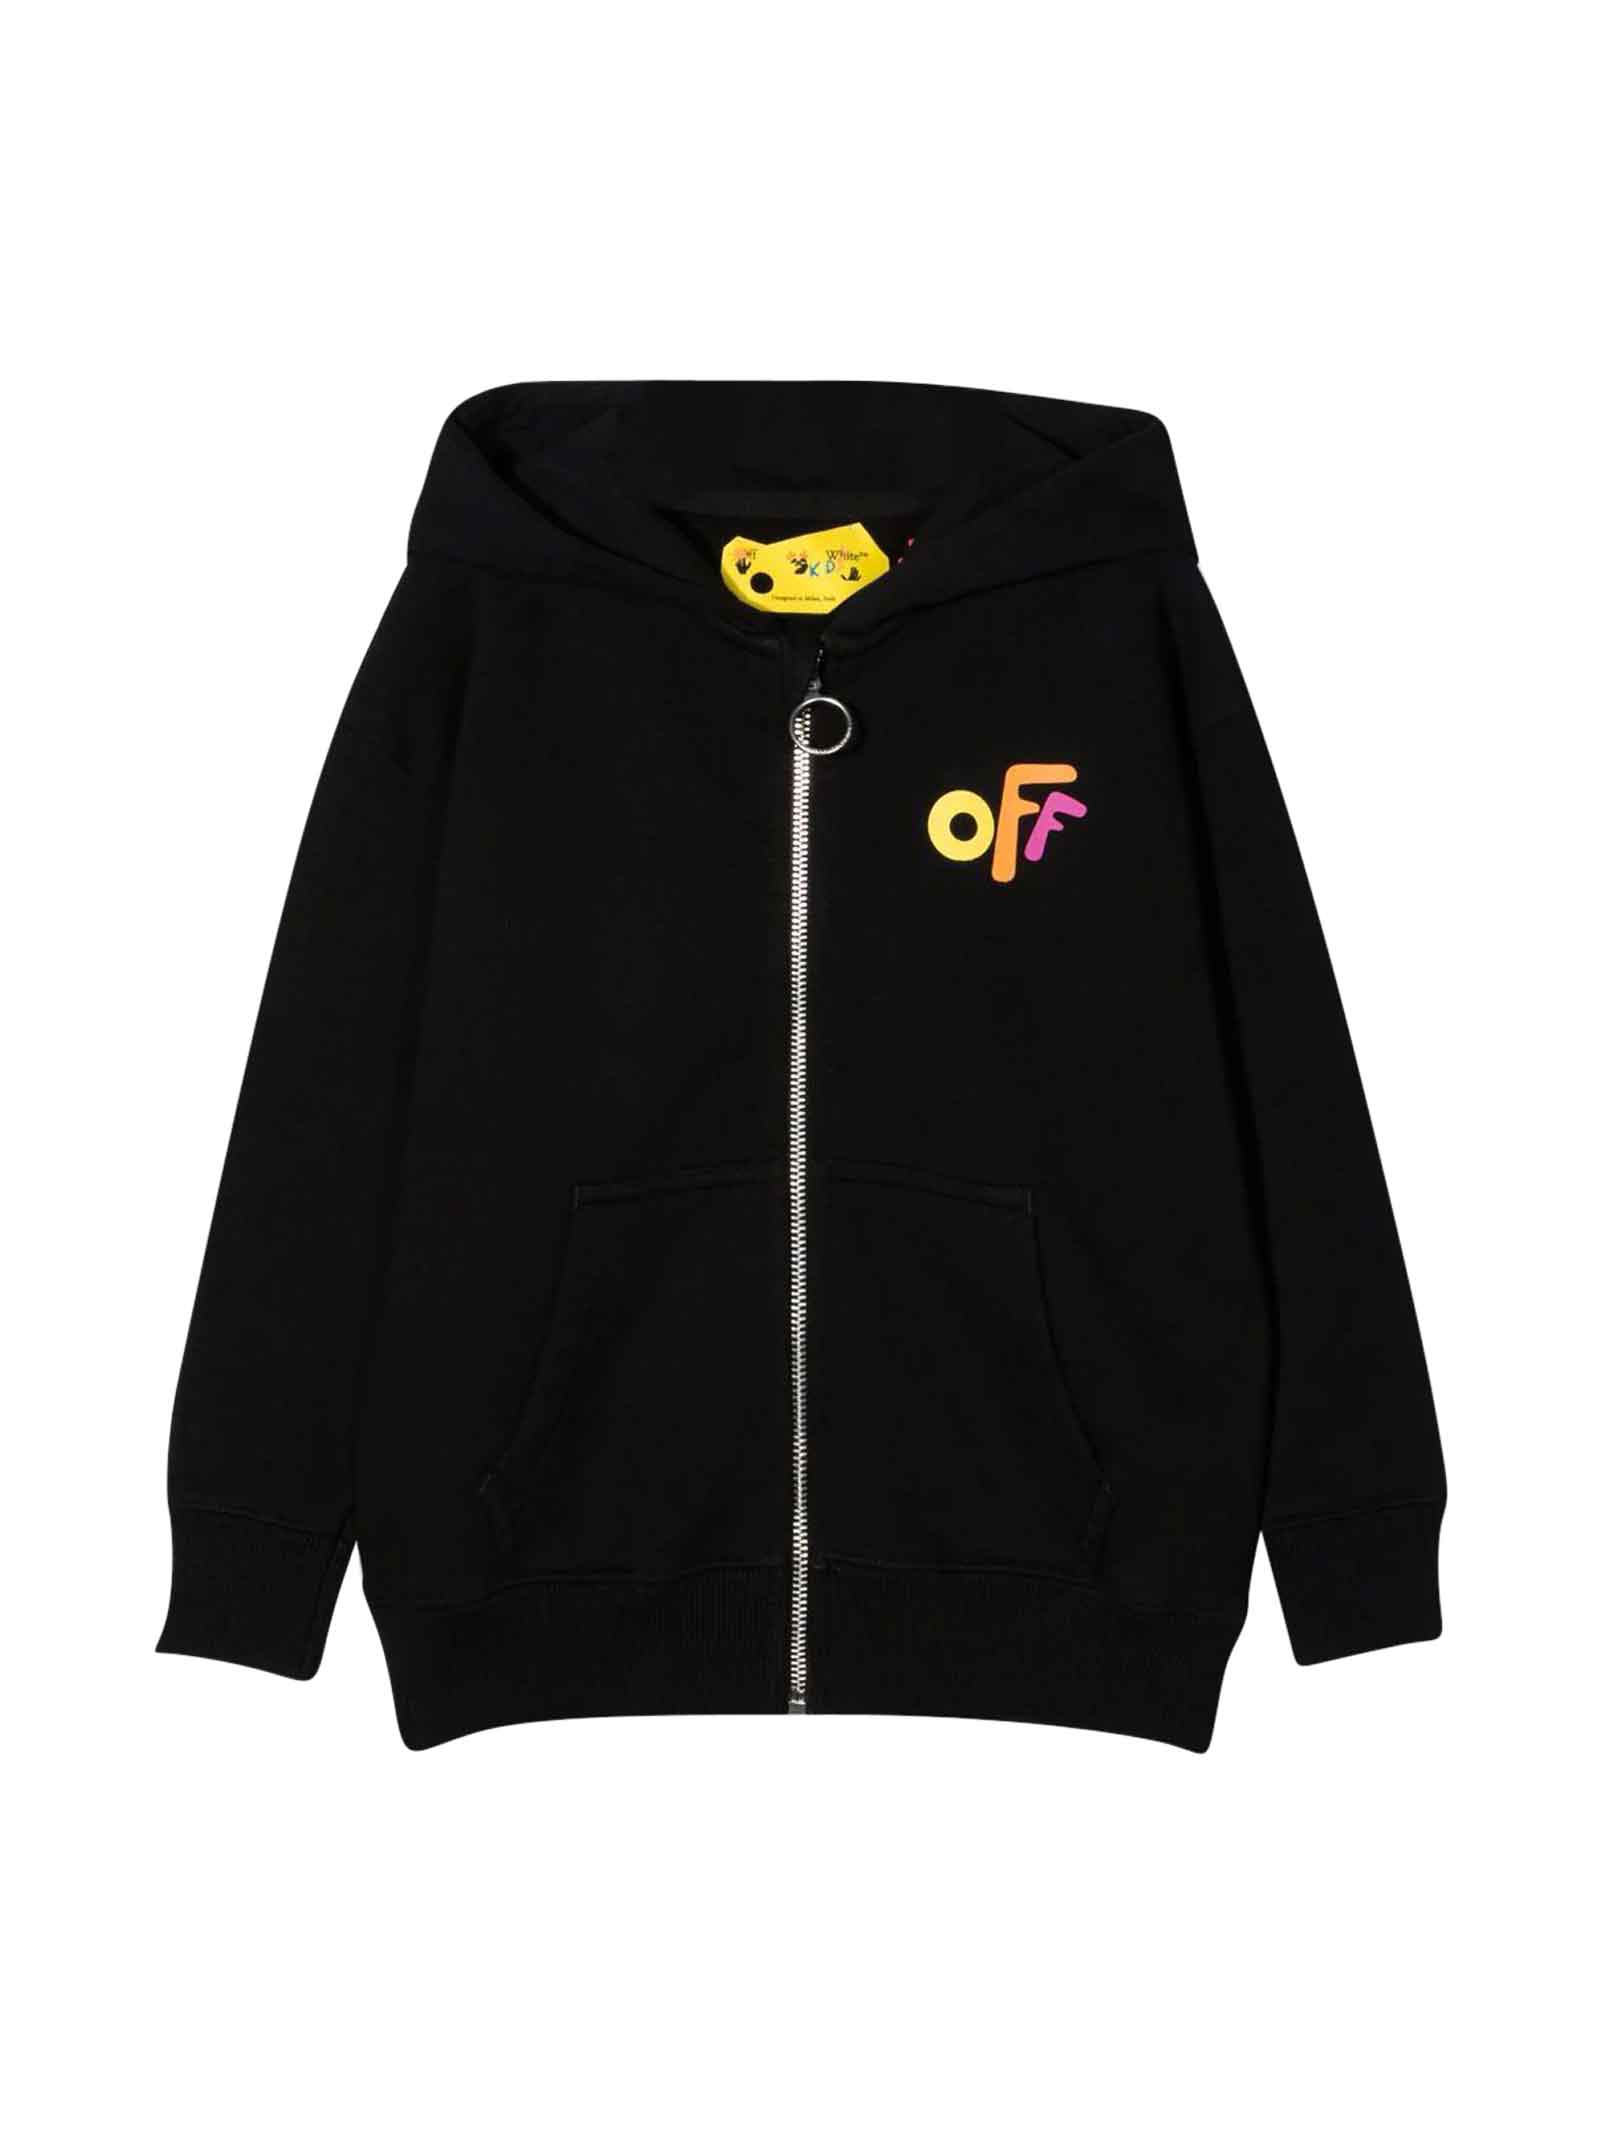 Off-White Black Sweatshirt With Hood And Multicolor Print